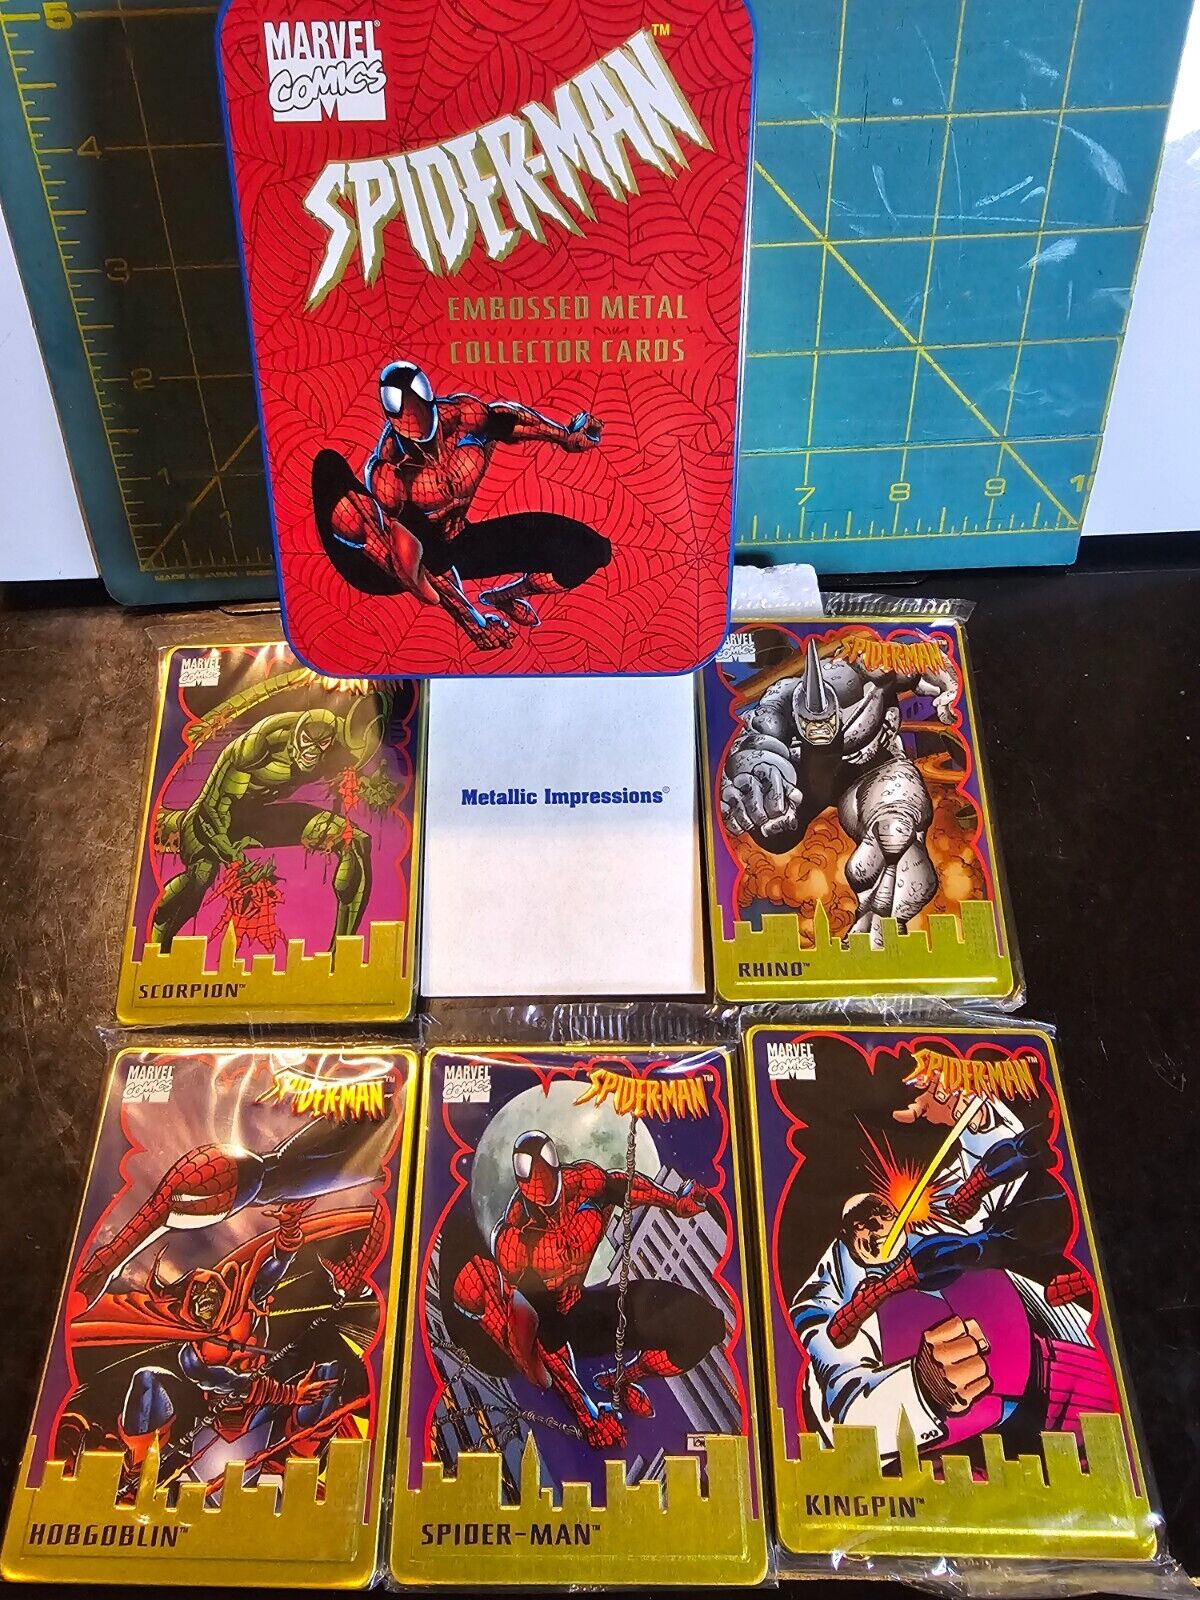 1996 Marvel Spiderman (5 Cards) Embossed Metal Collector Cards Tin